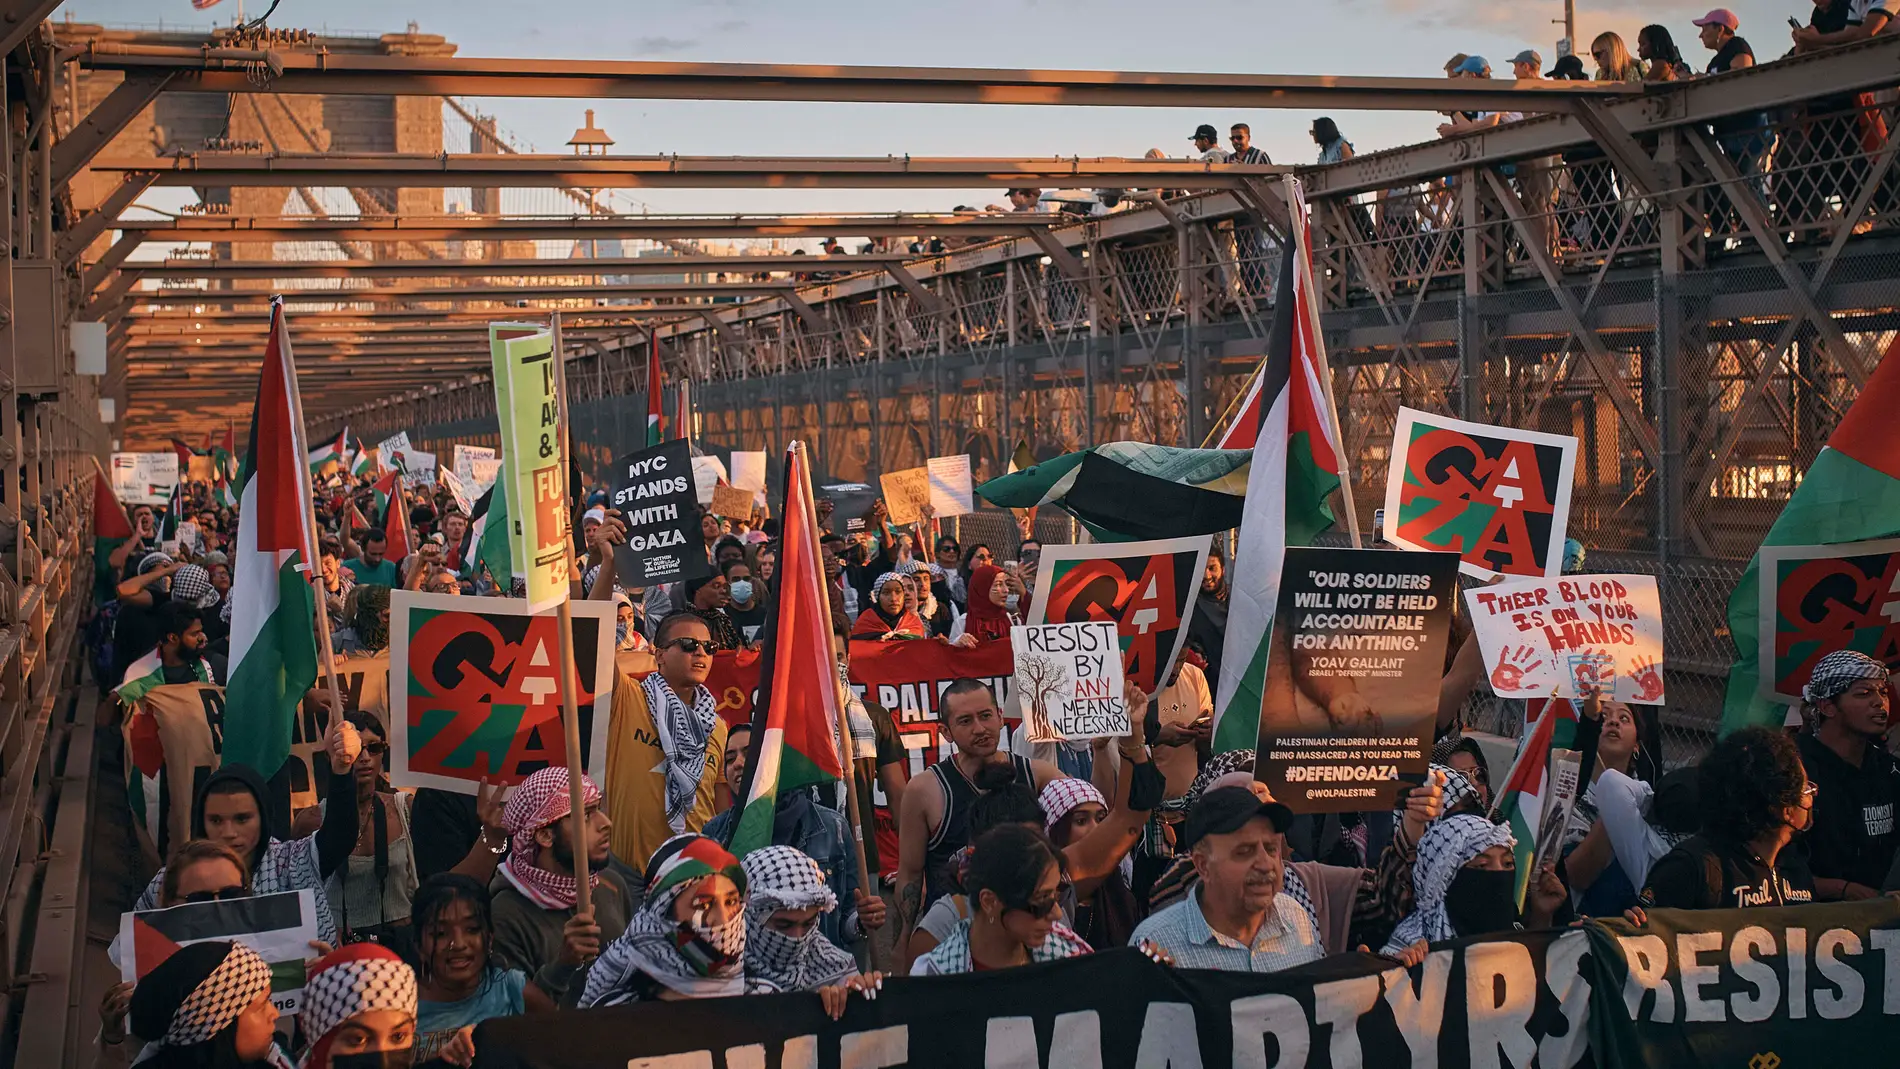 Palestinian supporters carry placards while shouting slogans as they cross Brooklyn Bridge during a demonstration demanding a cease-fire on Saturday, Oct. 28, 2023, in New York. (AP Photo/Andres Kudacki)